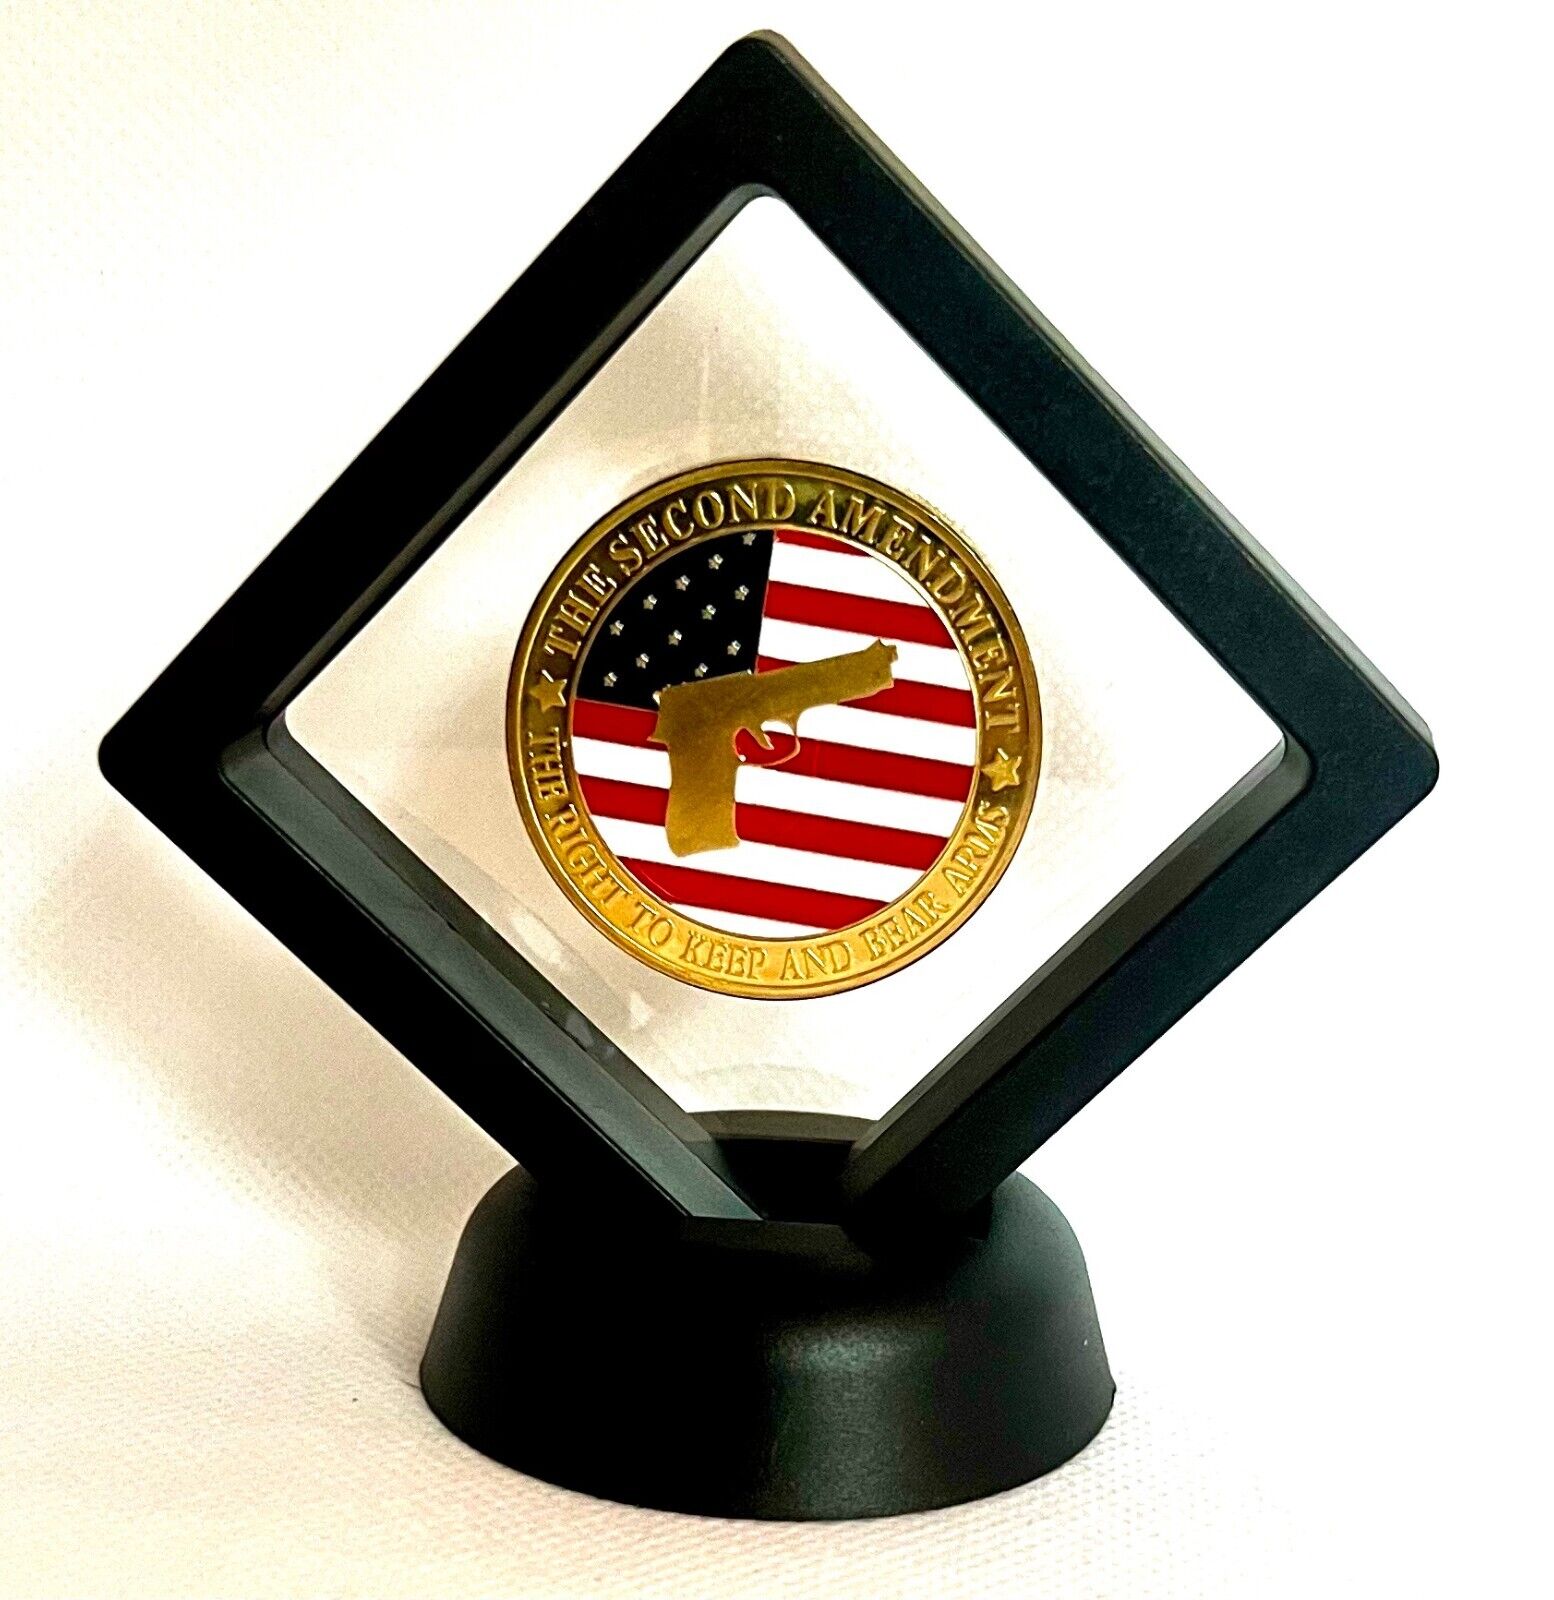 The Second Amendment of the United States Gold Challenge Coin